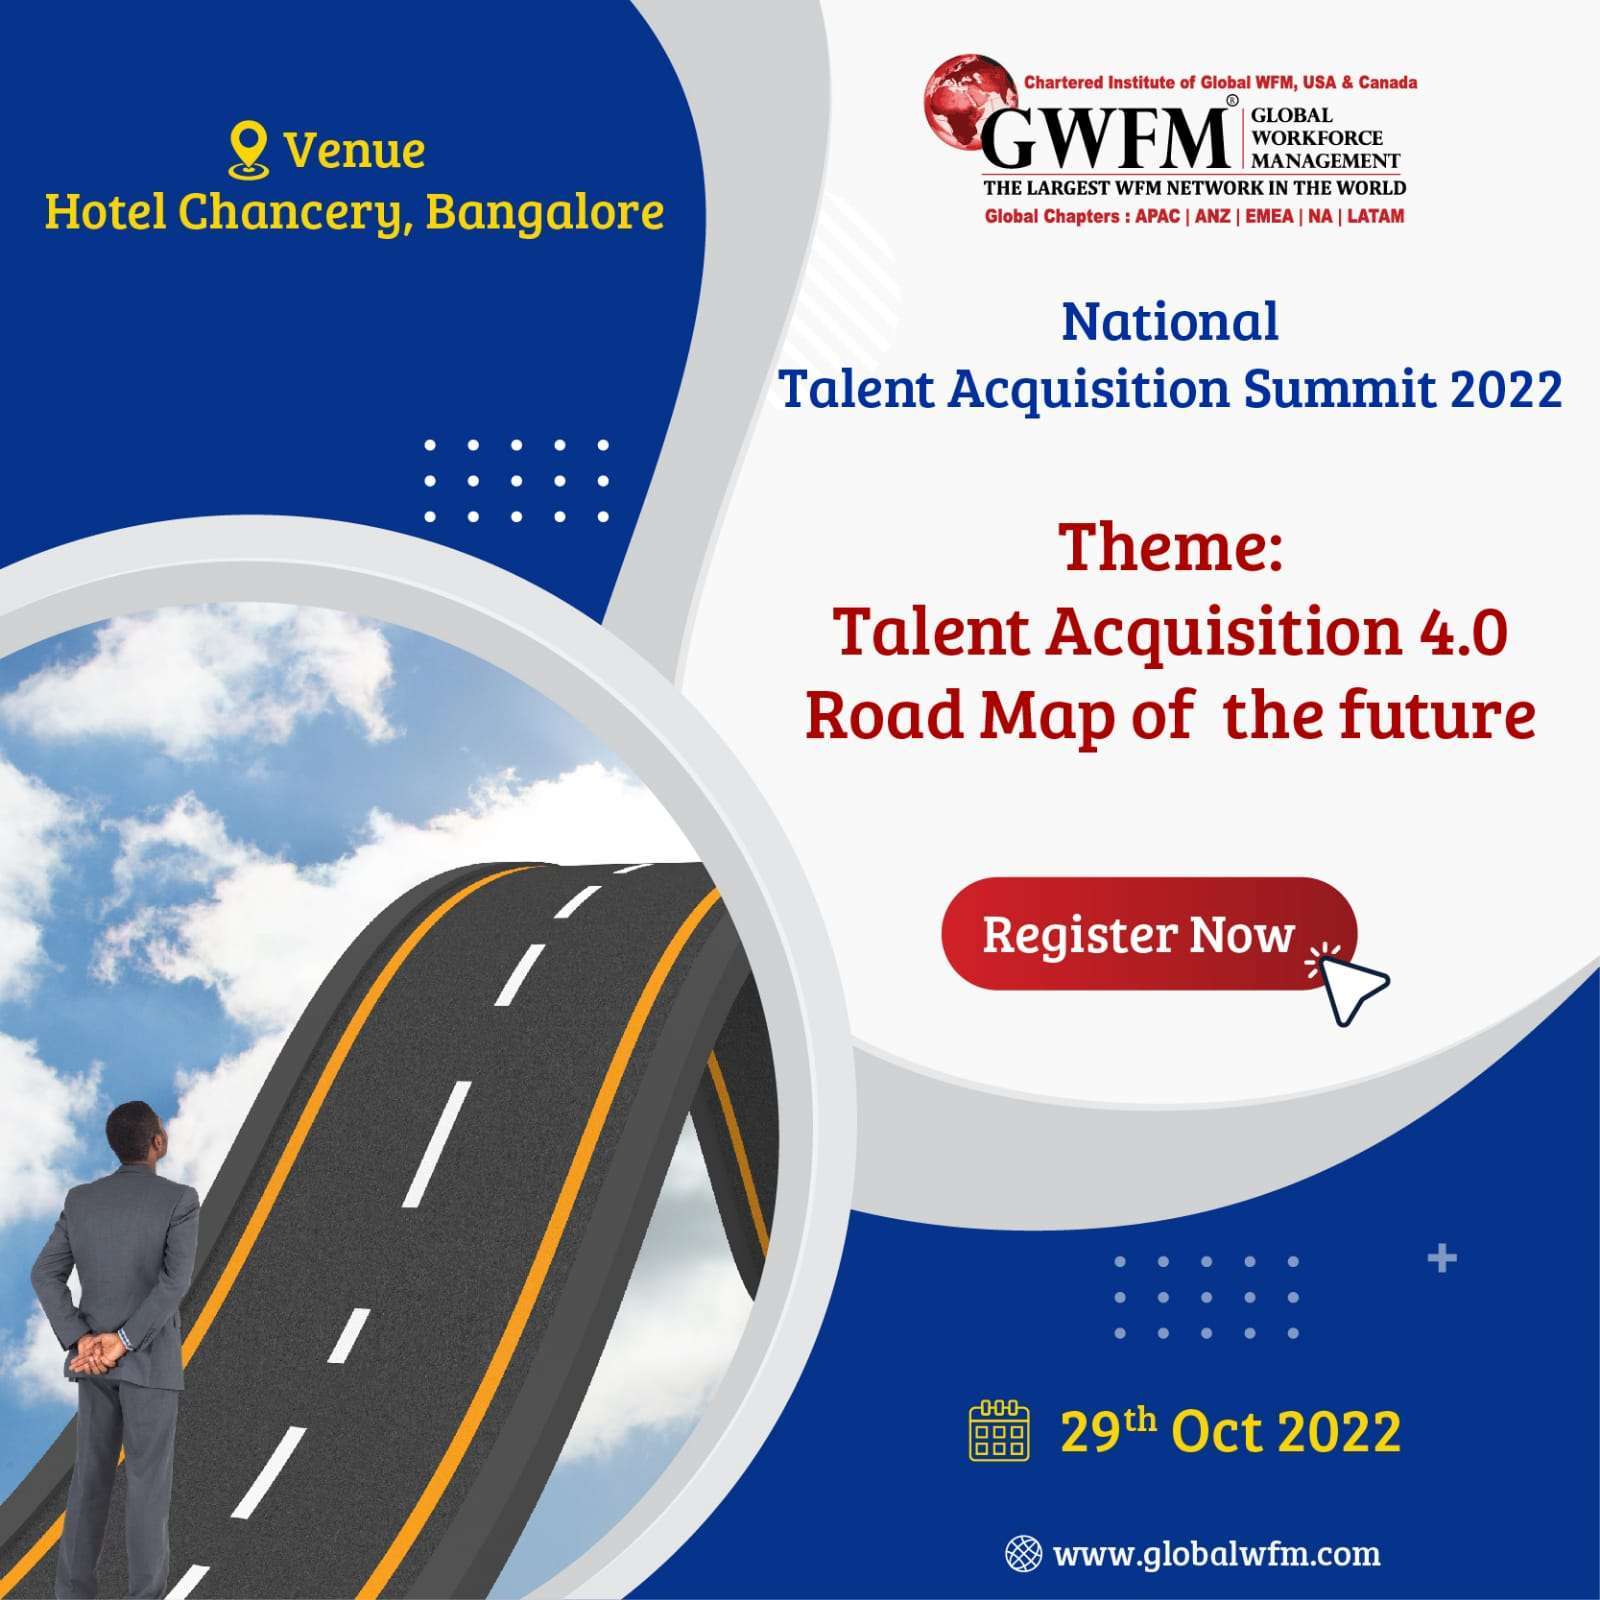 Talent Acquisition 4.0: Roadmap of the Future